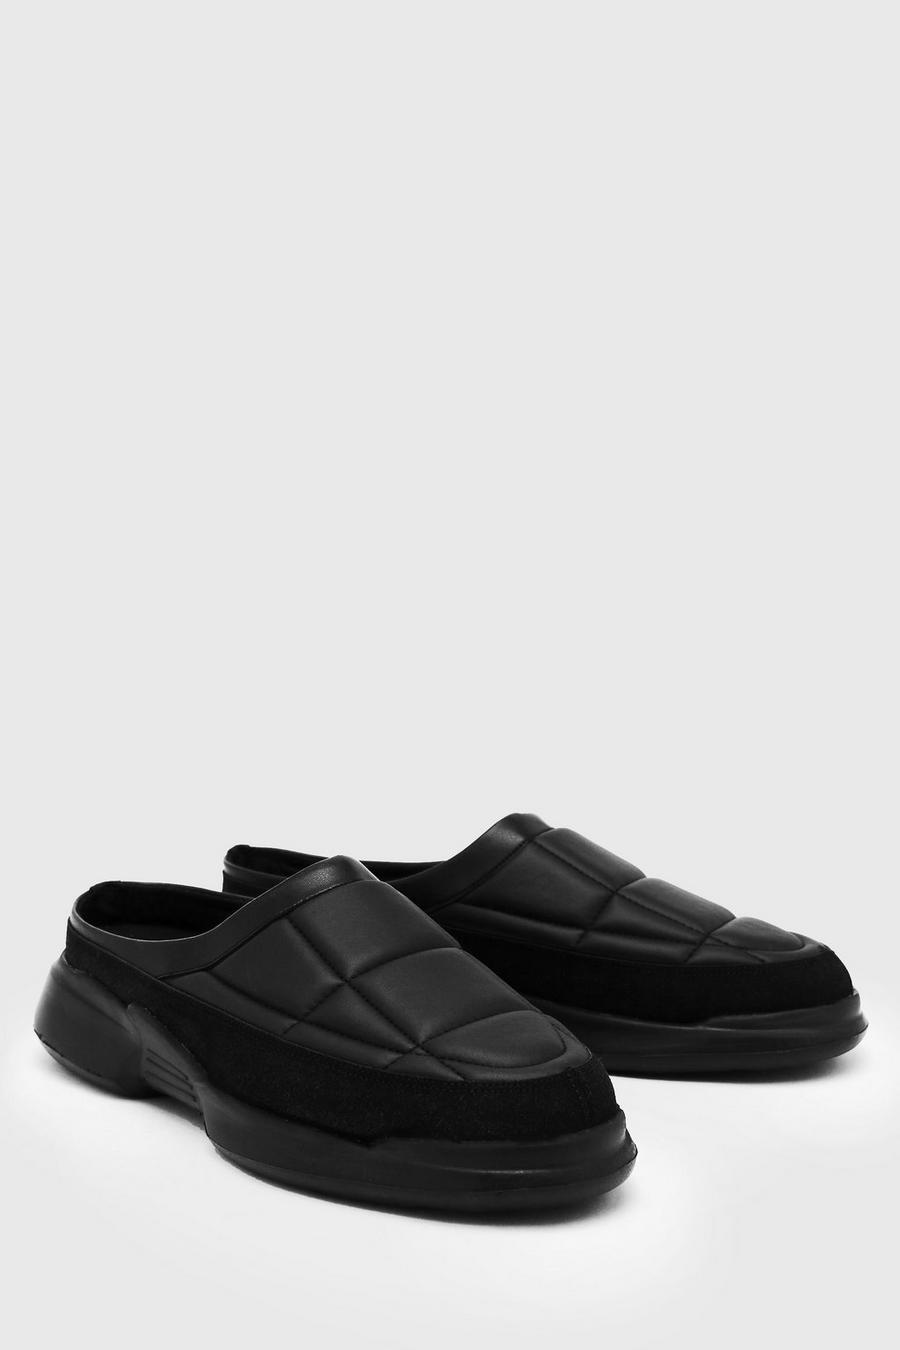 Black negro Quilted Faux Leather Mule